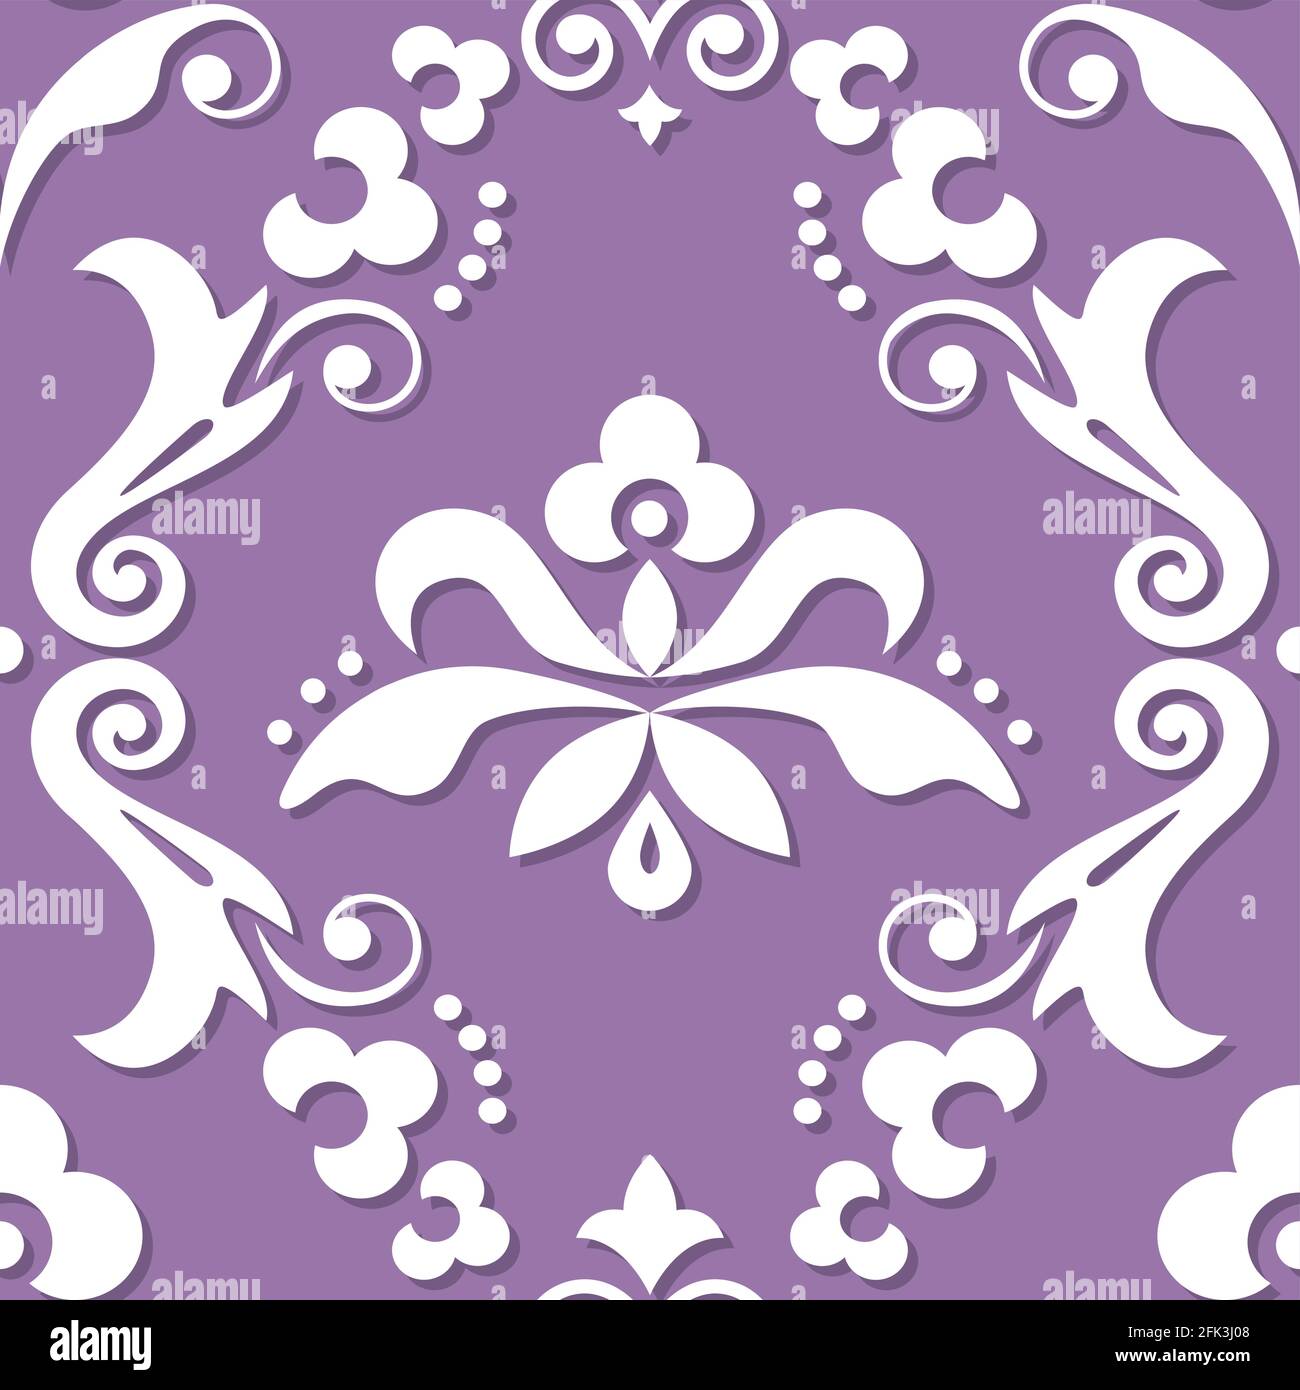 Damask royal vector seamless textile or farbic print pattern, classic victorian repetitive design with flowers, swirls and leaves in white on purple Stock Vector